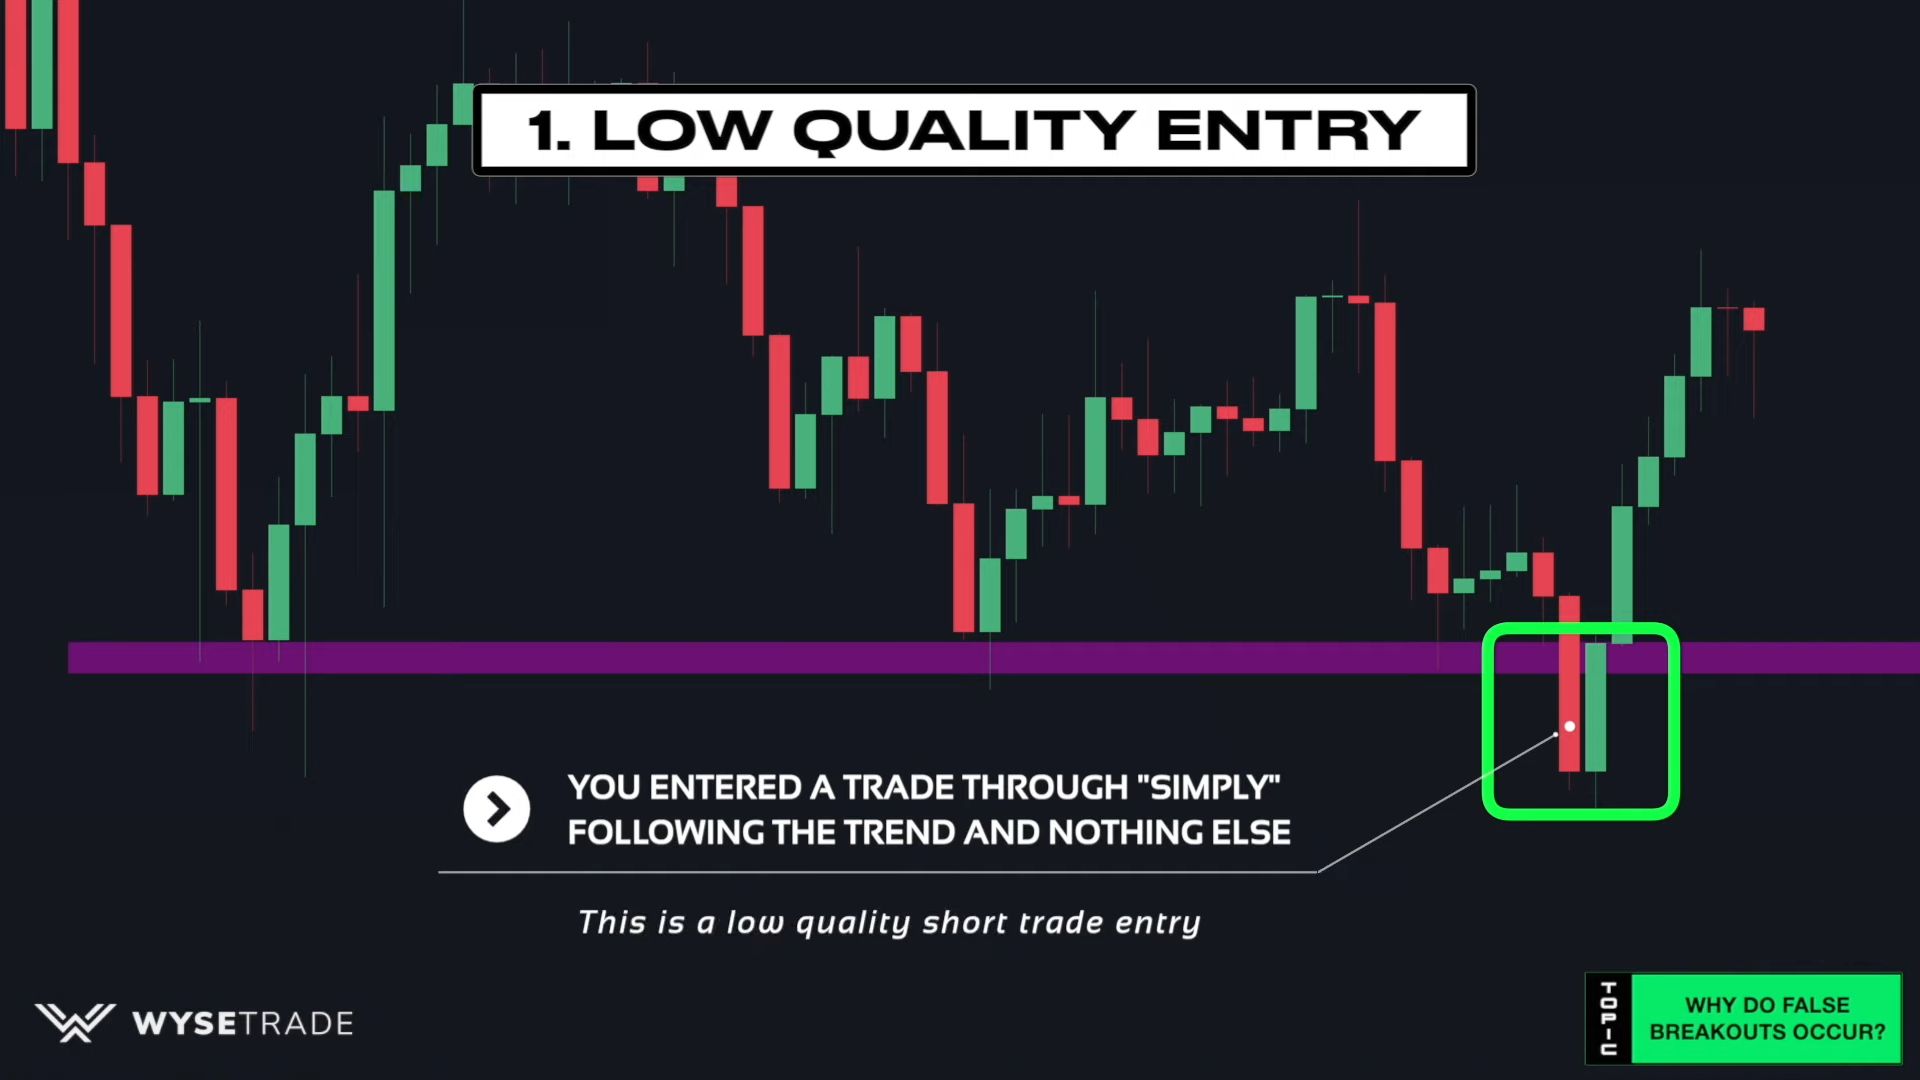 1.-LOW-OUALITY-ENTRY